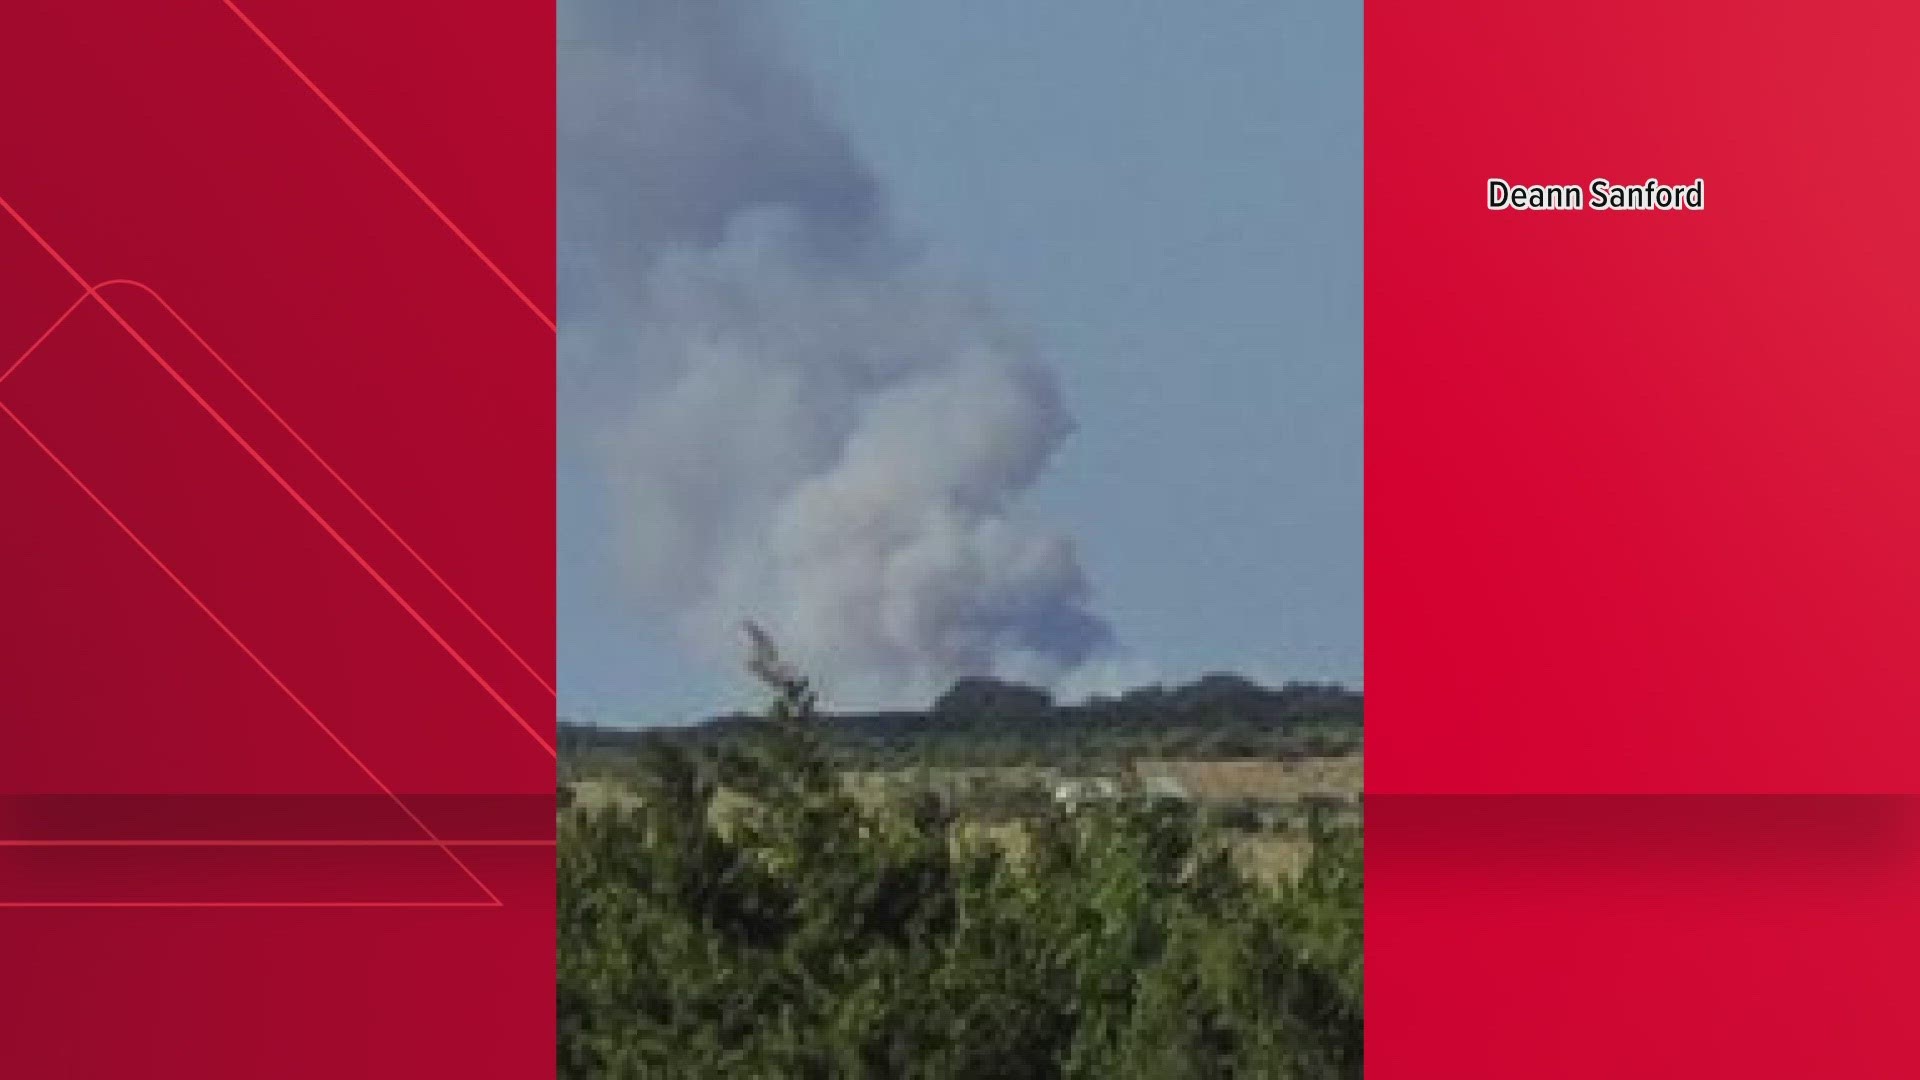 The Lucy Creek Fire has shut down traffic on 34-20, and the Texas A&M Forest Service says the fire is 25% contained at the moment.